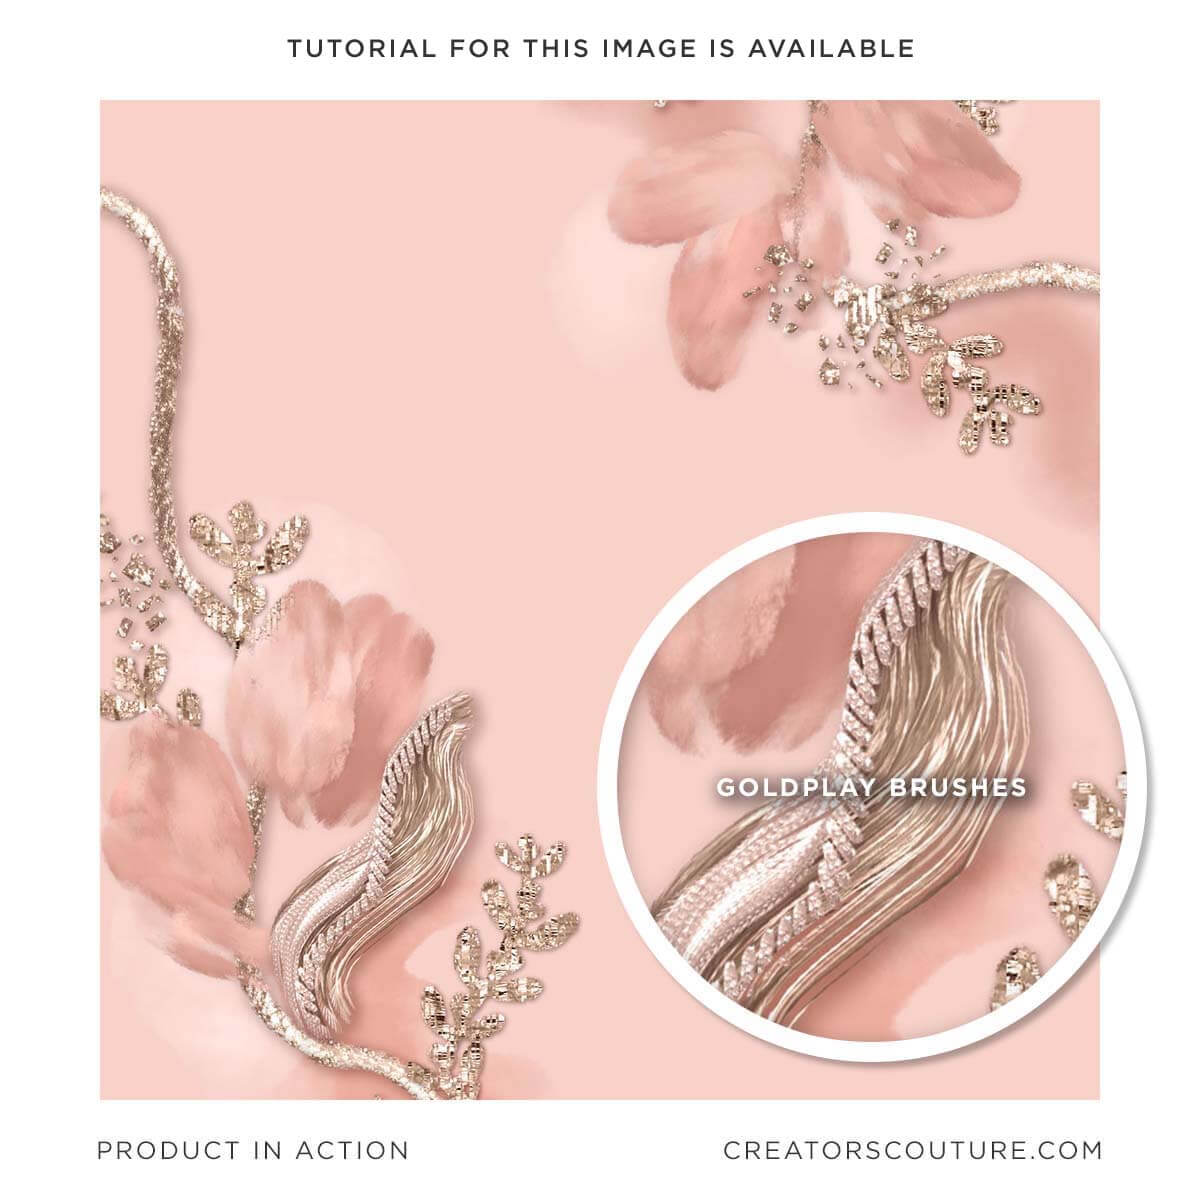 pink flower and white gold illustration, sample using 3d metallic gold photoshop brushes in white gold effect